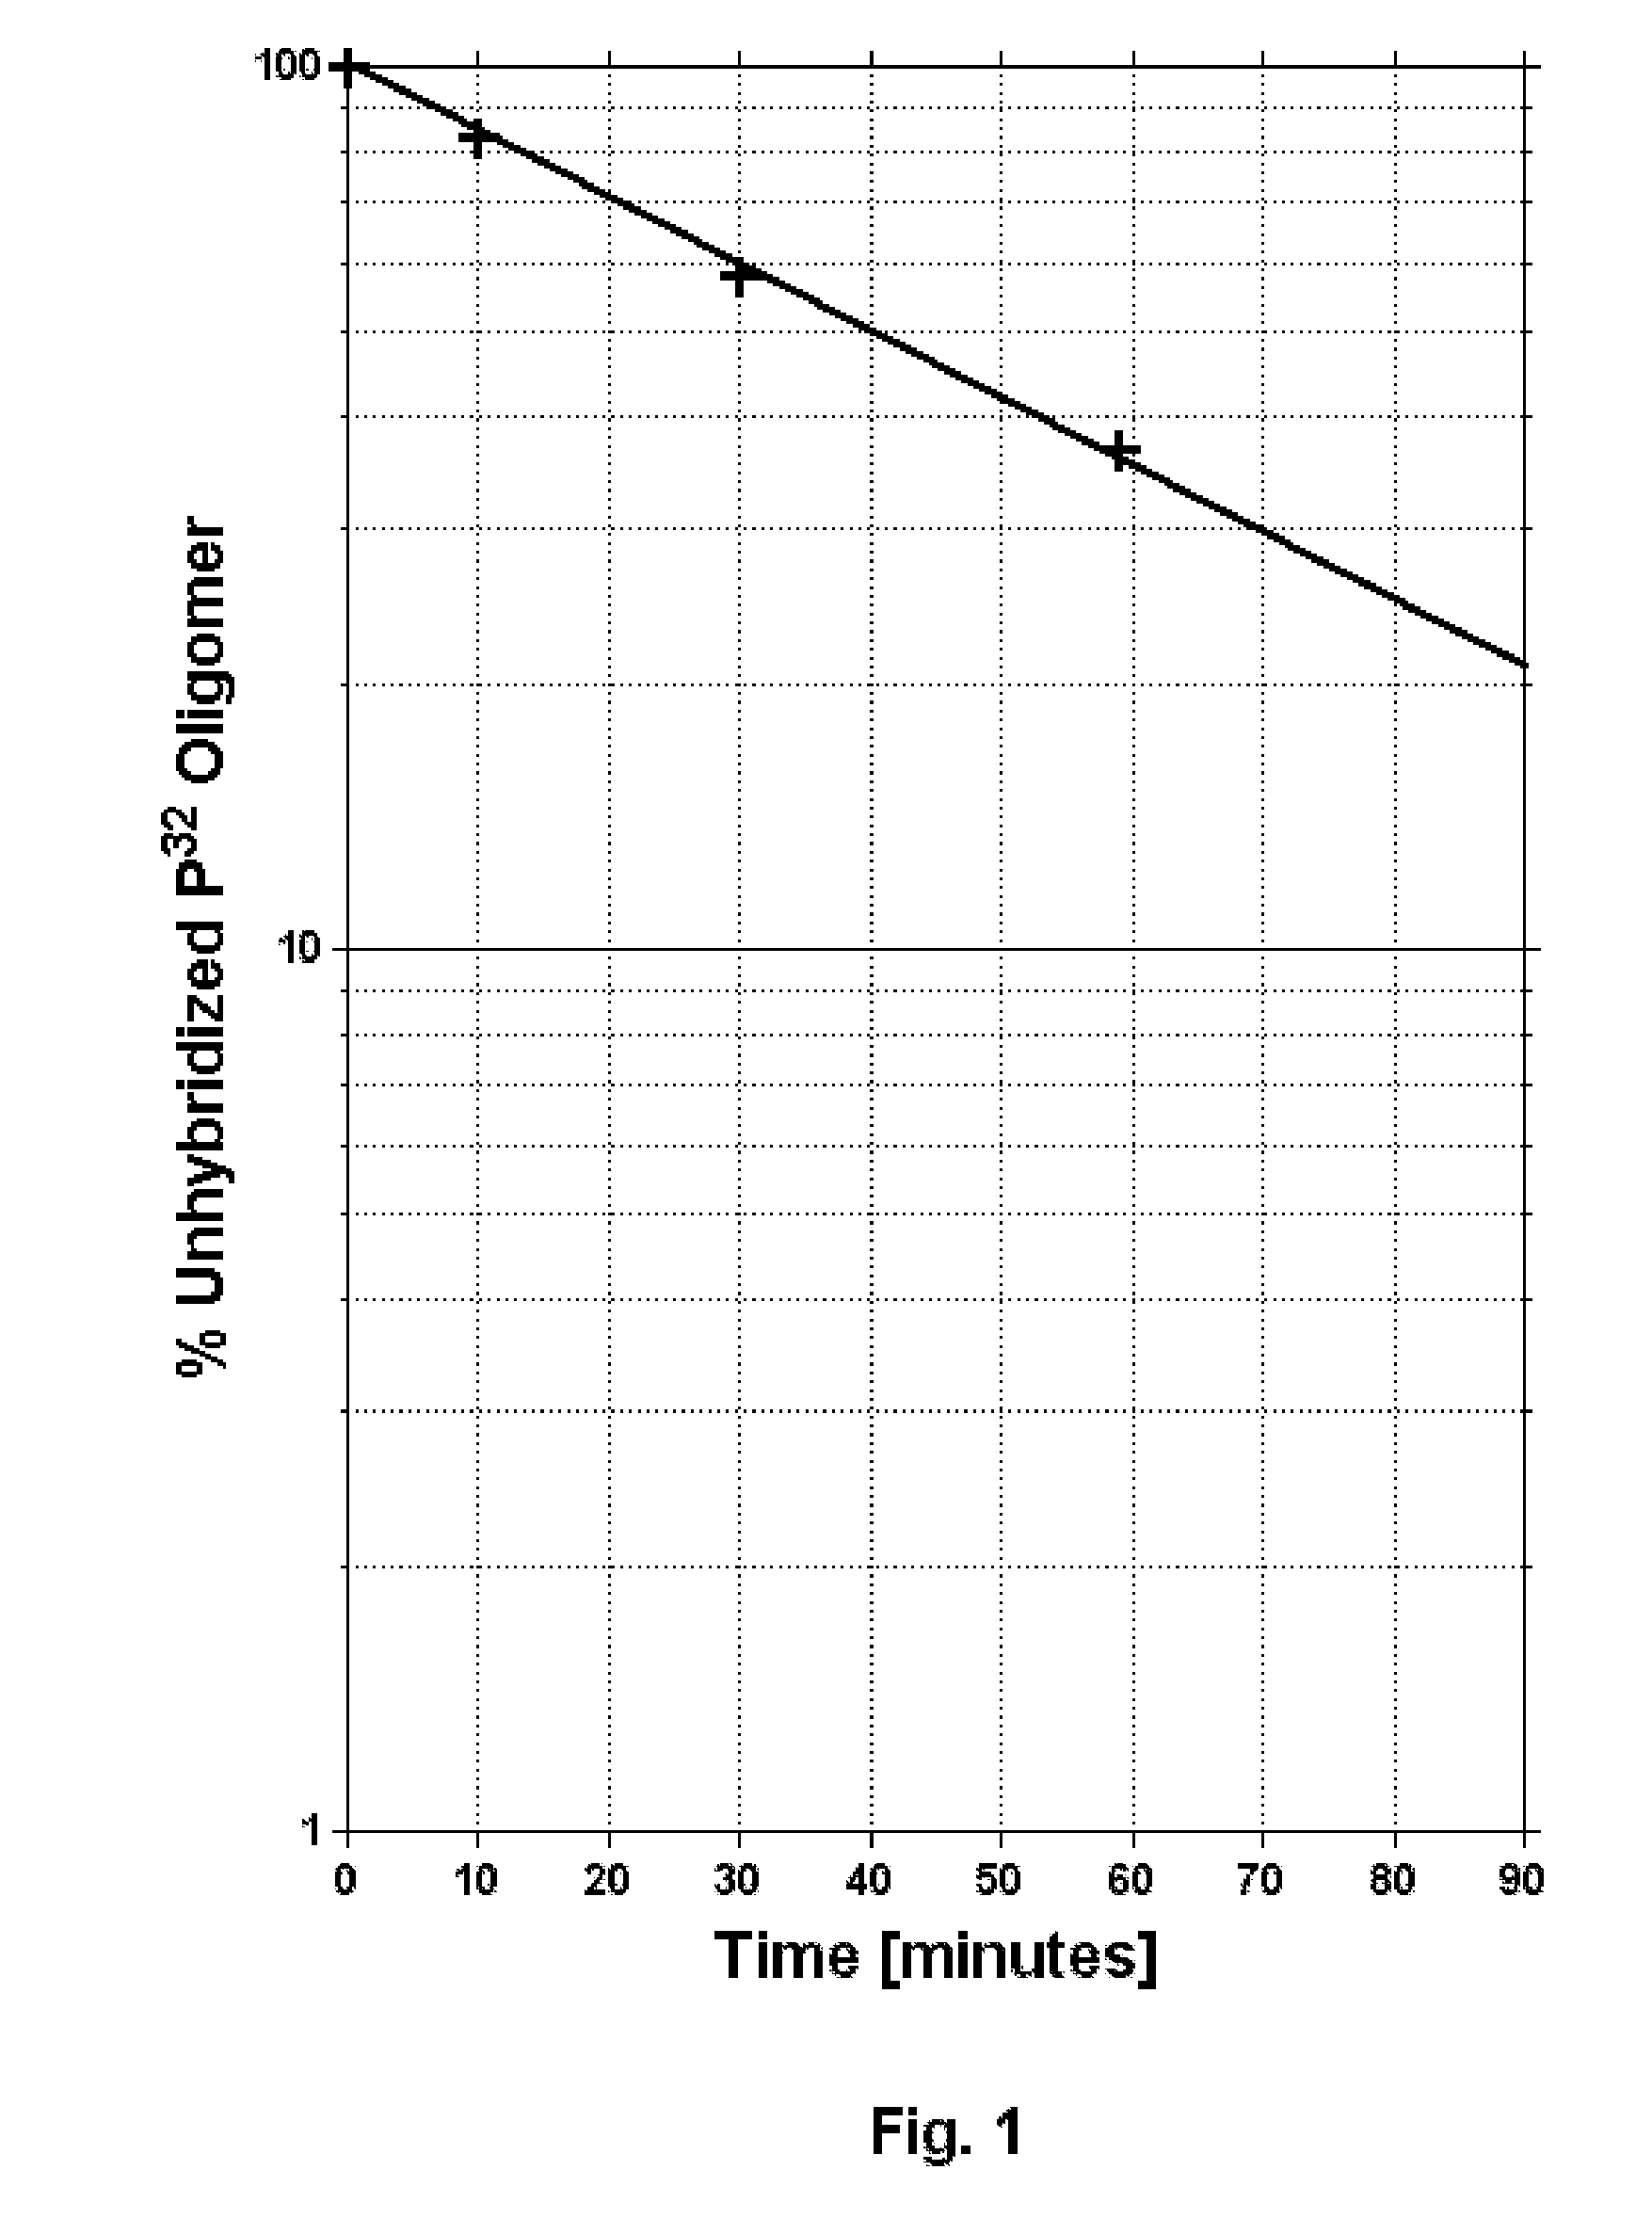 Method for producing improved nucleic acid oligomer functional homogeneity and functional characteristic information and results and oligomer application results